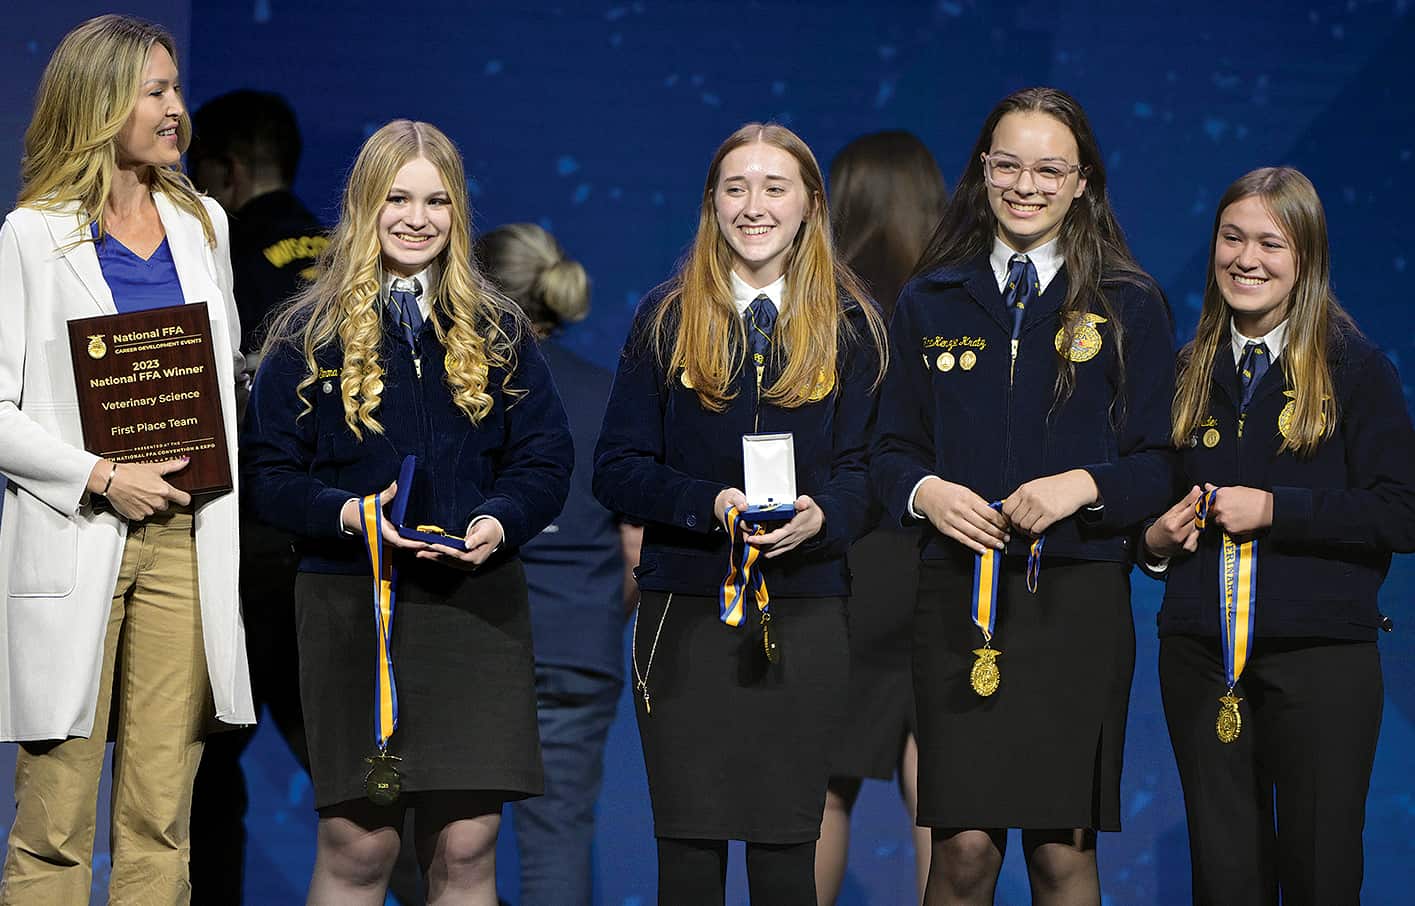 96th National FFA Convention Veterinary Science Awards